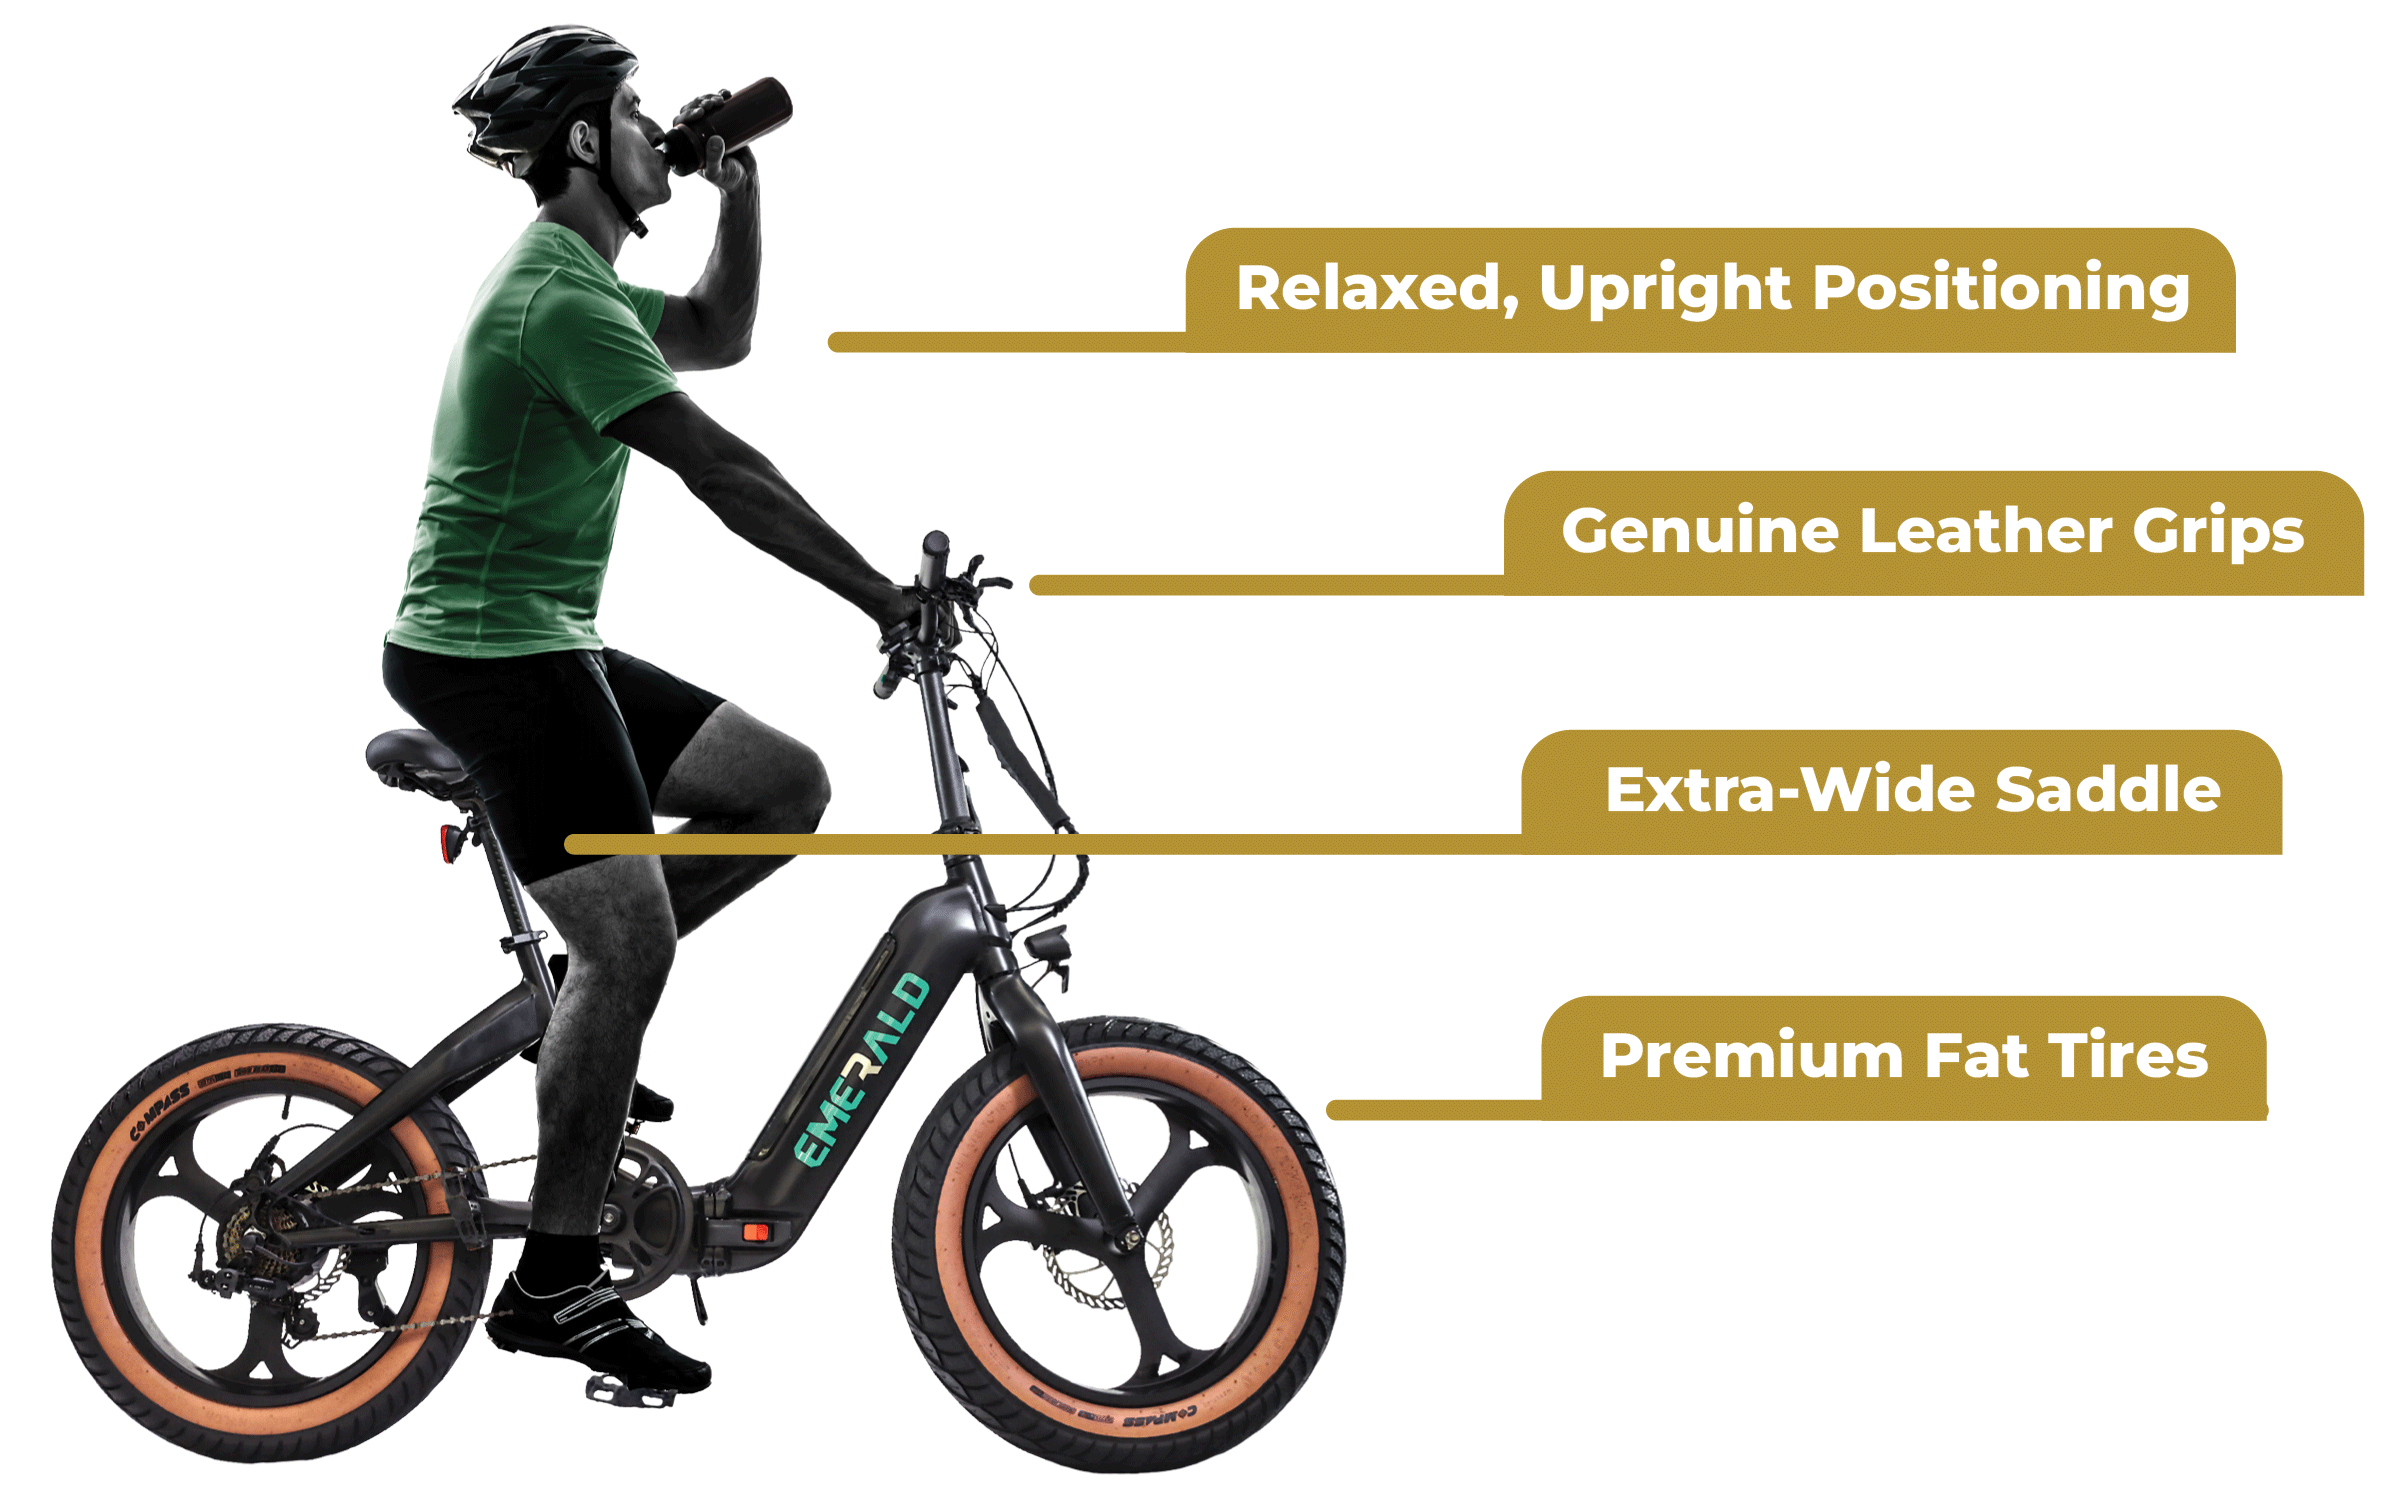 The Emerald E-bike has plenty of great features.